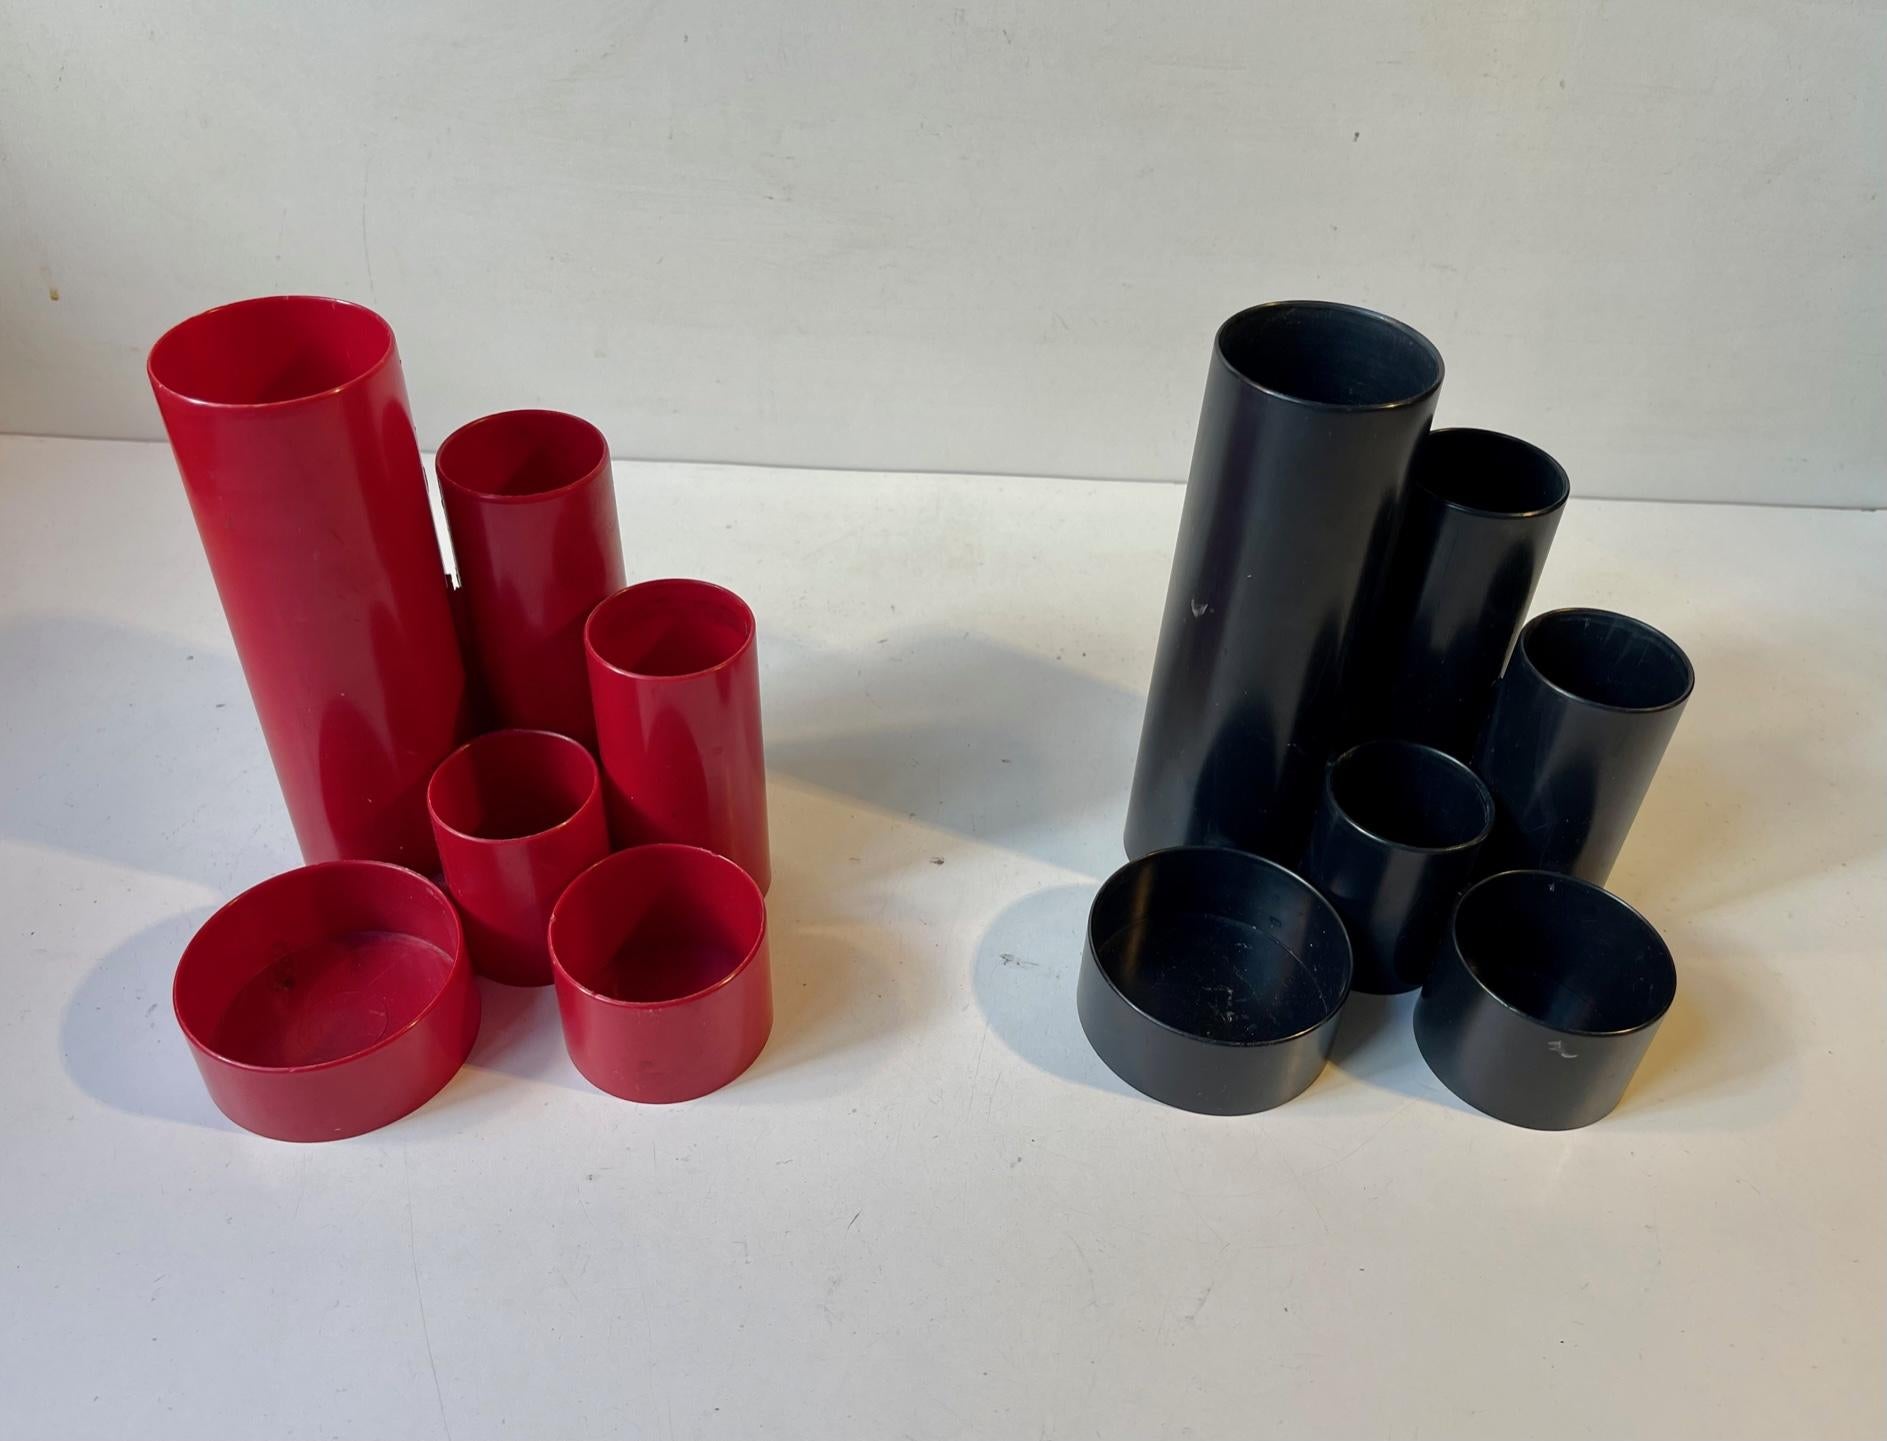 A red and a black pencil-holder in cast acrylic. 1970s Modern architectural styling. Designed and manufactured by Pentex in Switzerland. Each with 6 cylindrical compartments for utensils, scissors, clips etc. Measurements: H: 15 cm, W: 14 cm, Dept: